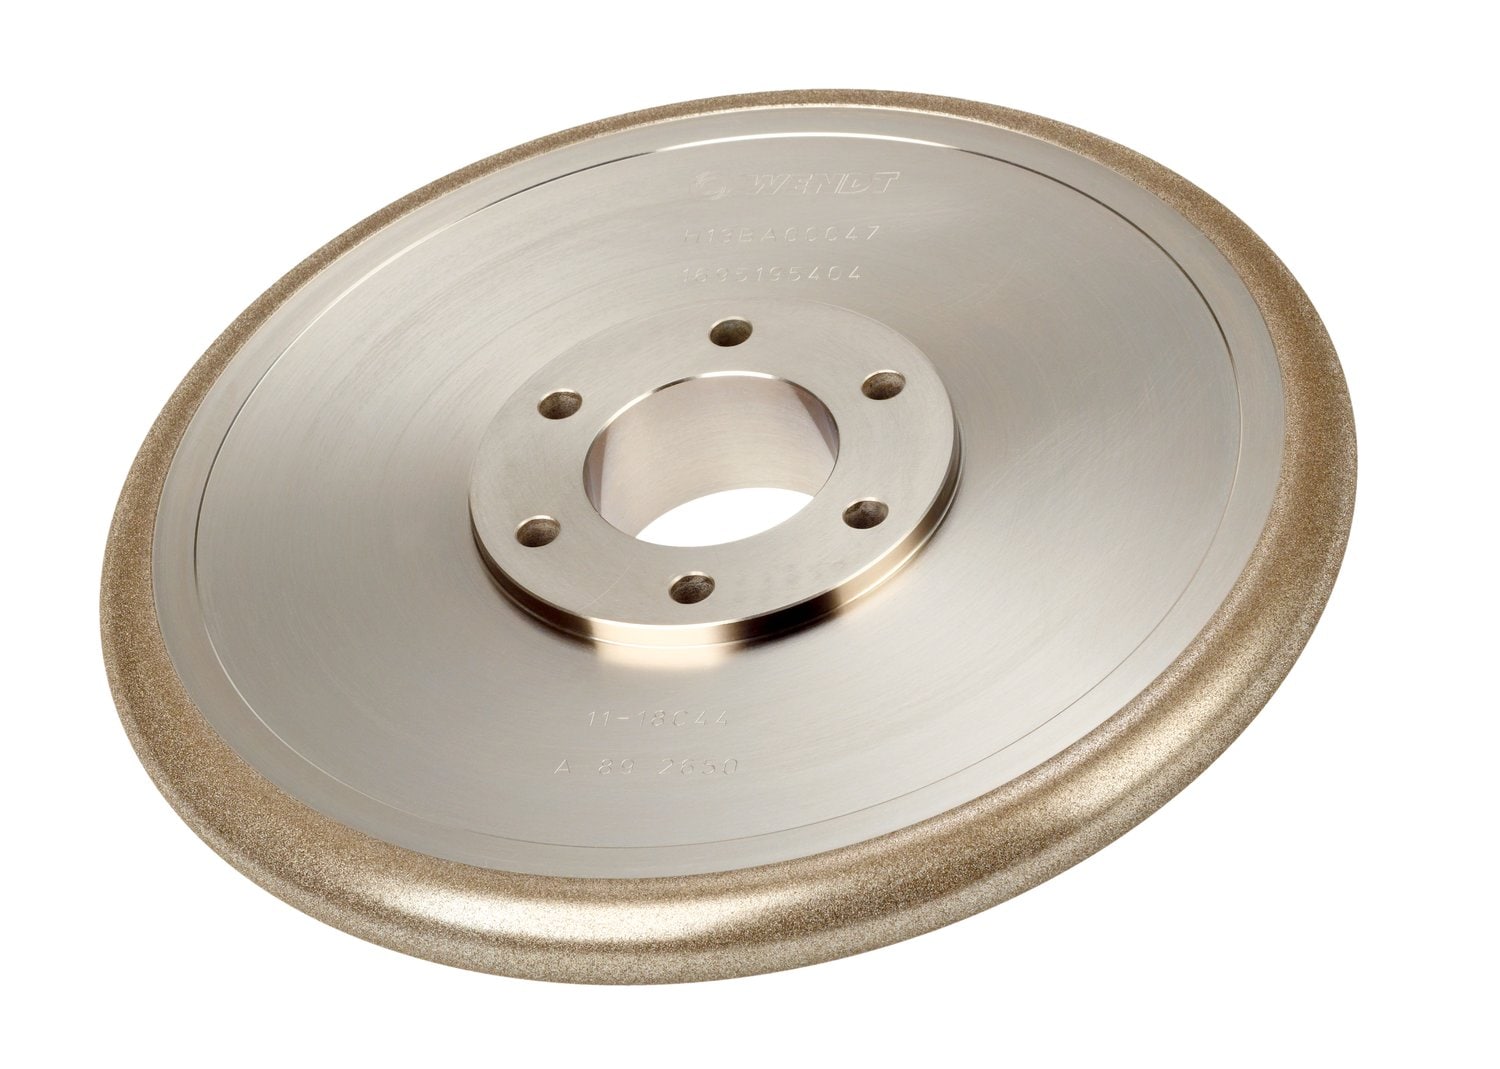 7010497598 - 3M Electroplated CBN Wheels and Tools, PLATED BURRS, DIAMOND, K7010-2 -
MMMF2610